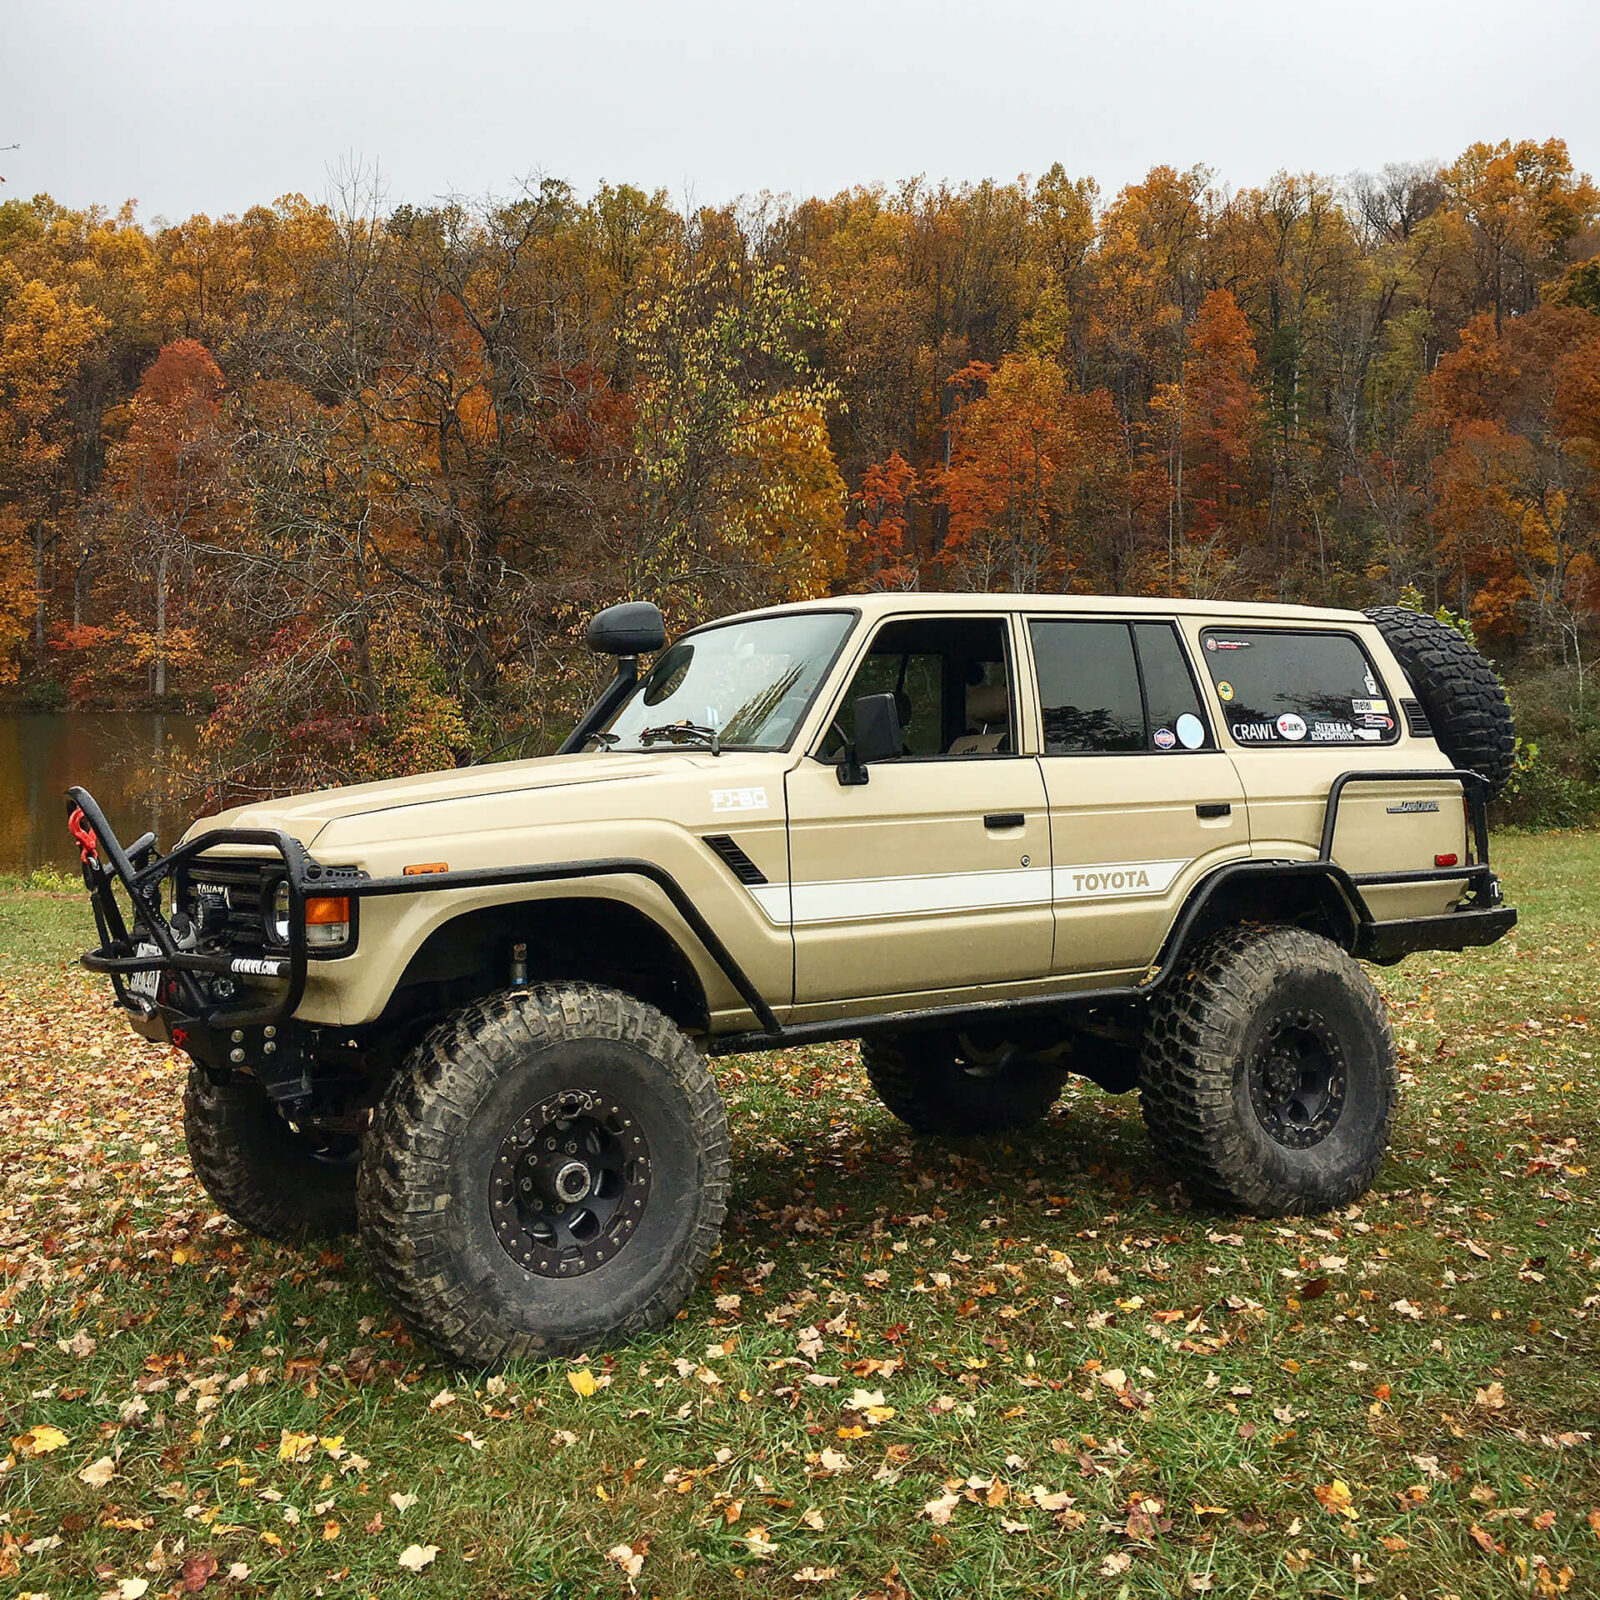 1985 Toyota Land Cruiser FJ60 on 40s – The Perfect Off-road Build